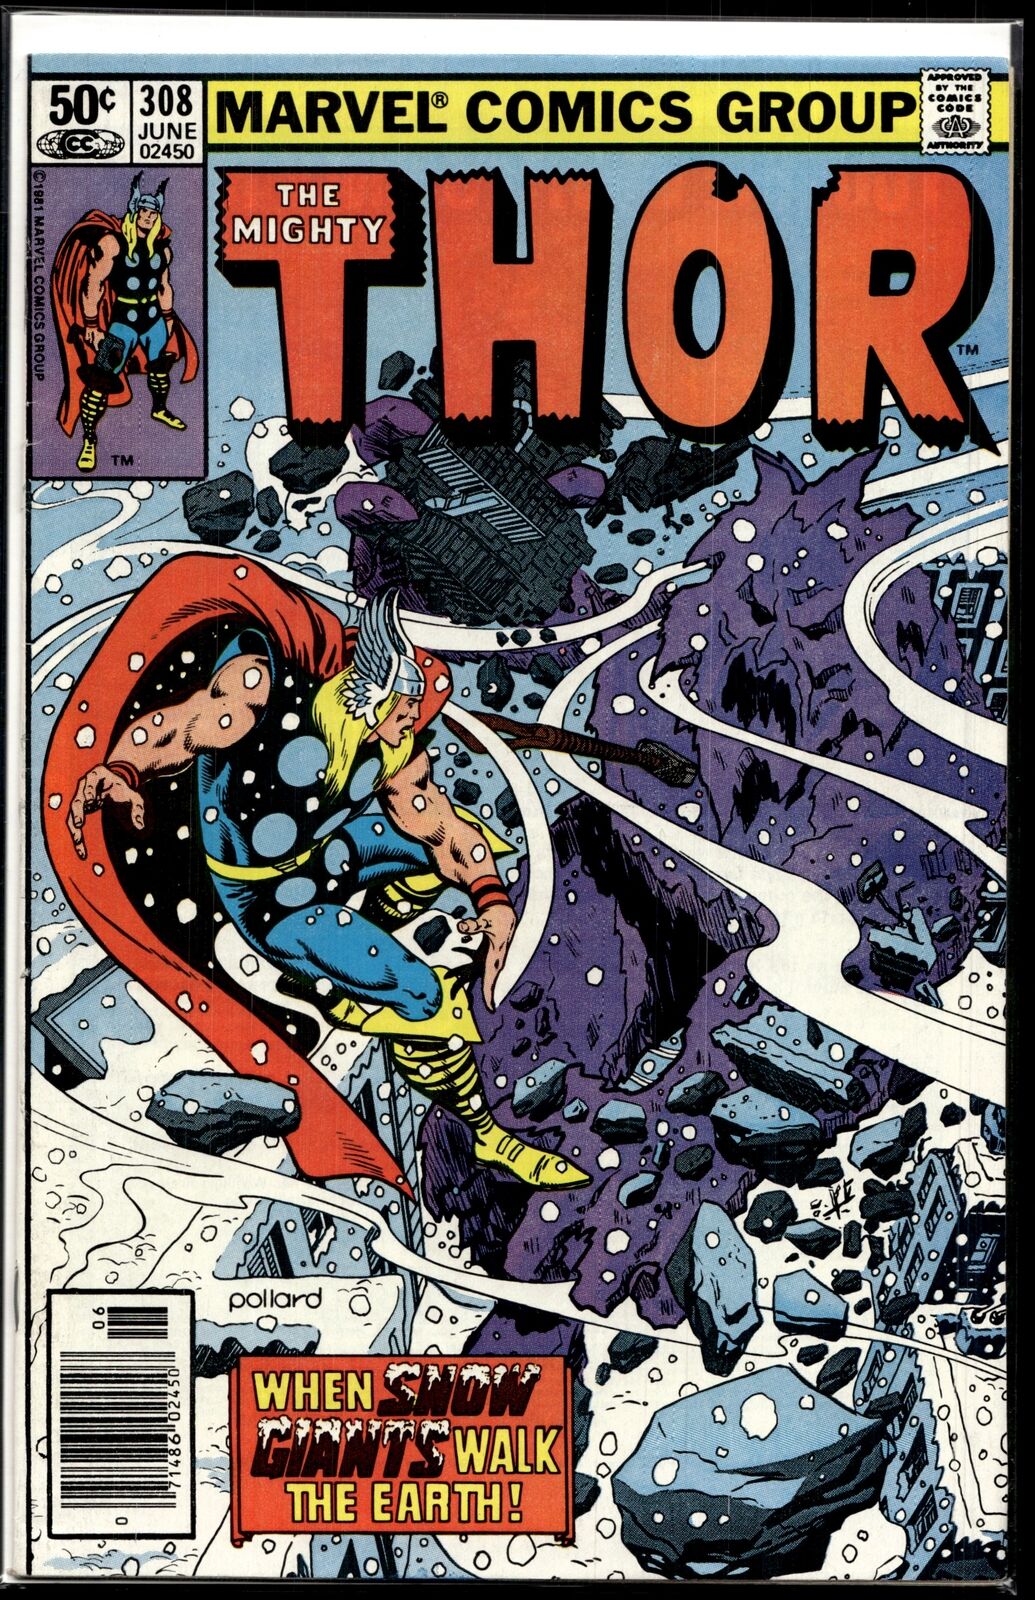 1981 Mighty Thor #308 Newsstand Marvel Comic